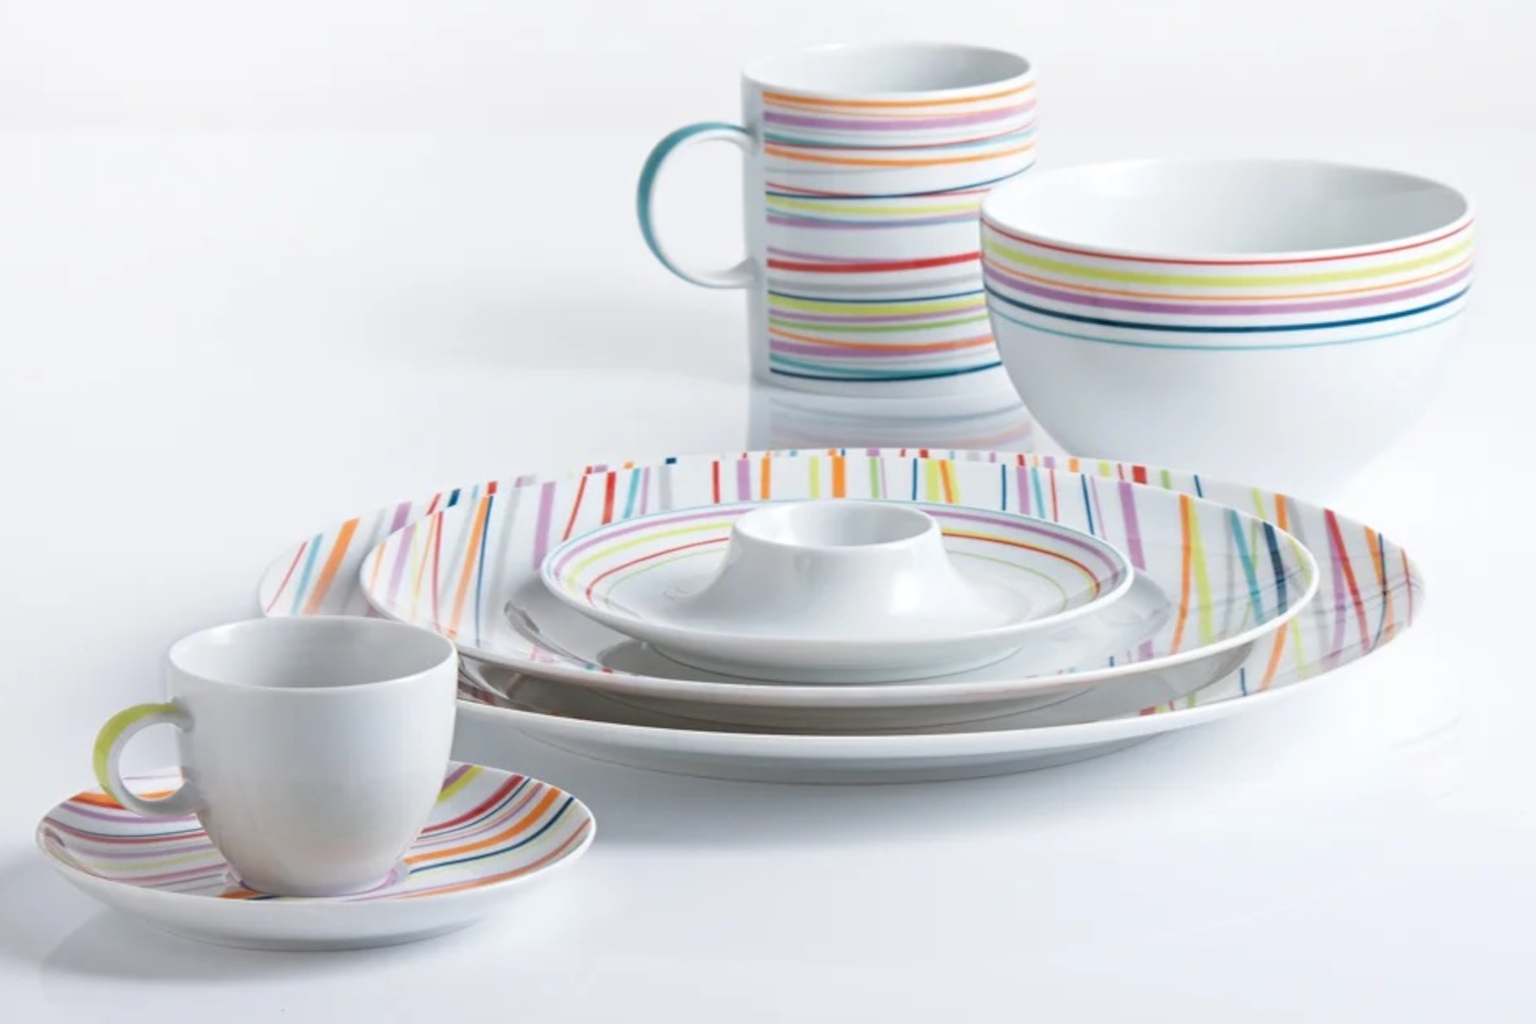 Thomas Sunny Day Stripes plate, egg cup, espresso cup, mug and bowl